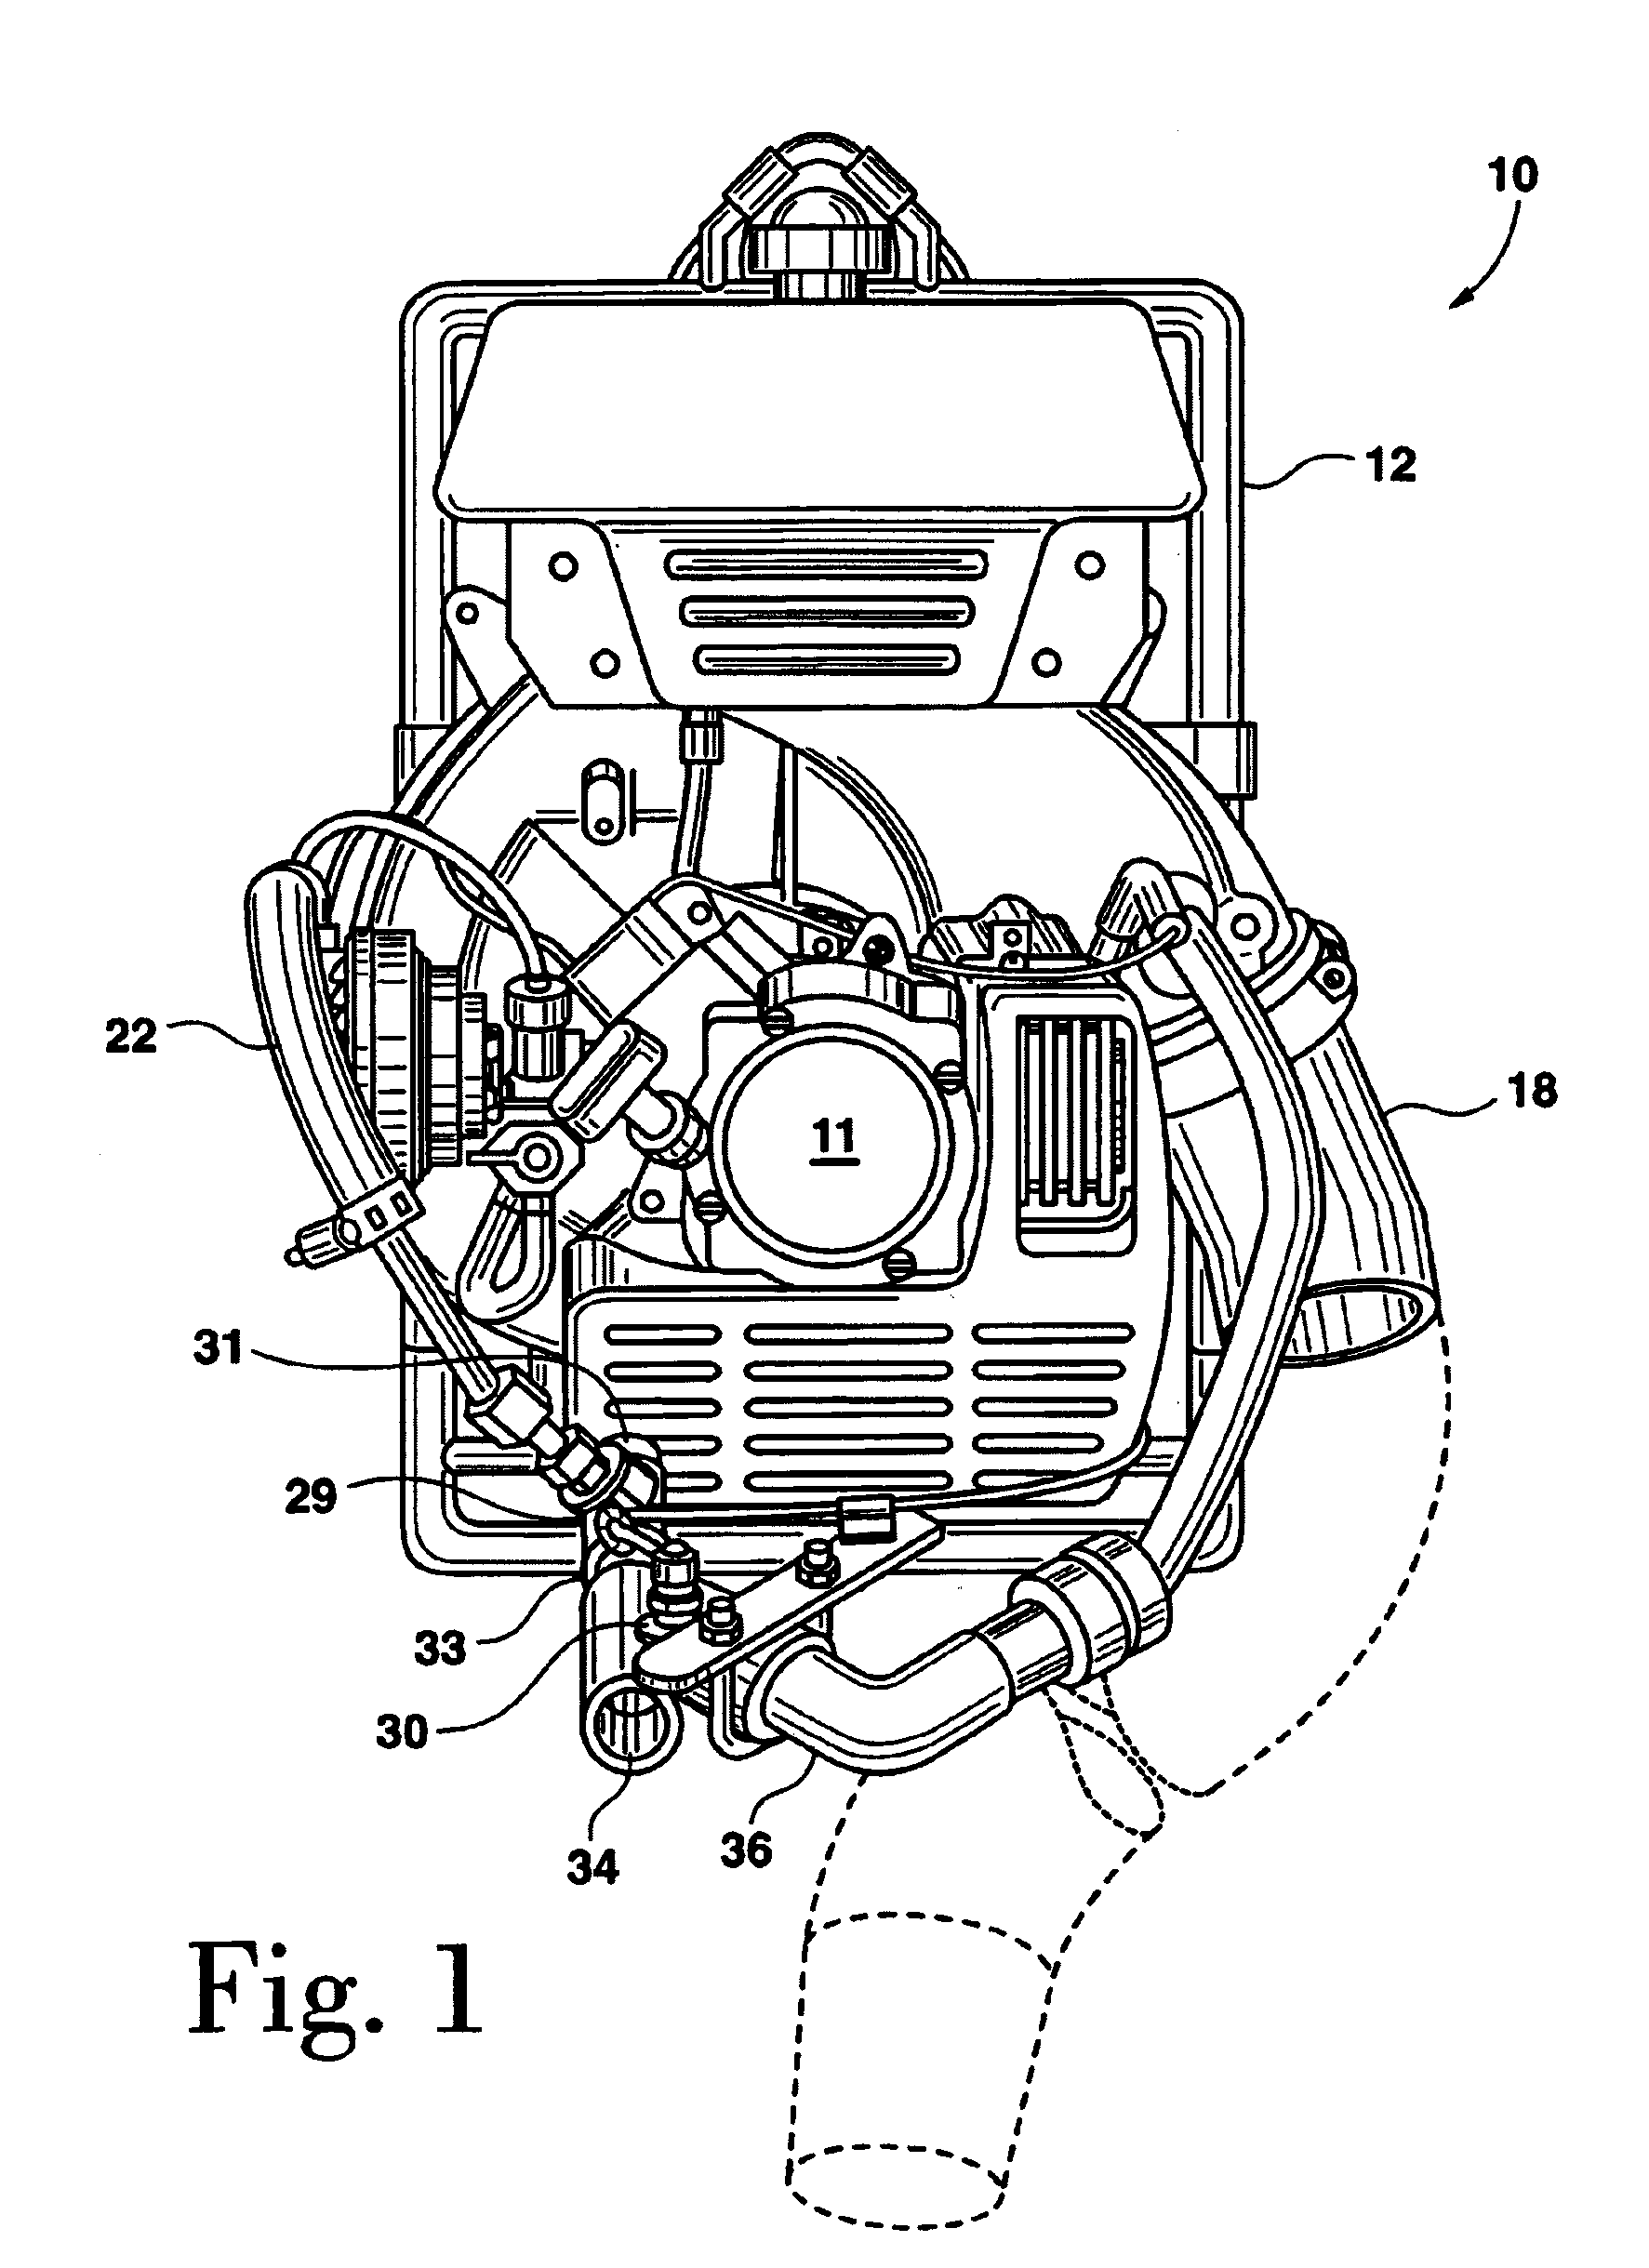 Air blower for extinguishing fires and method for extinguishing fires